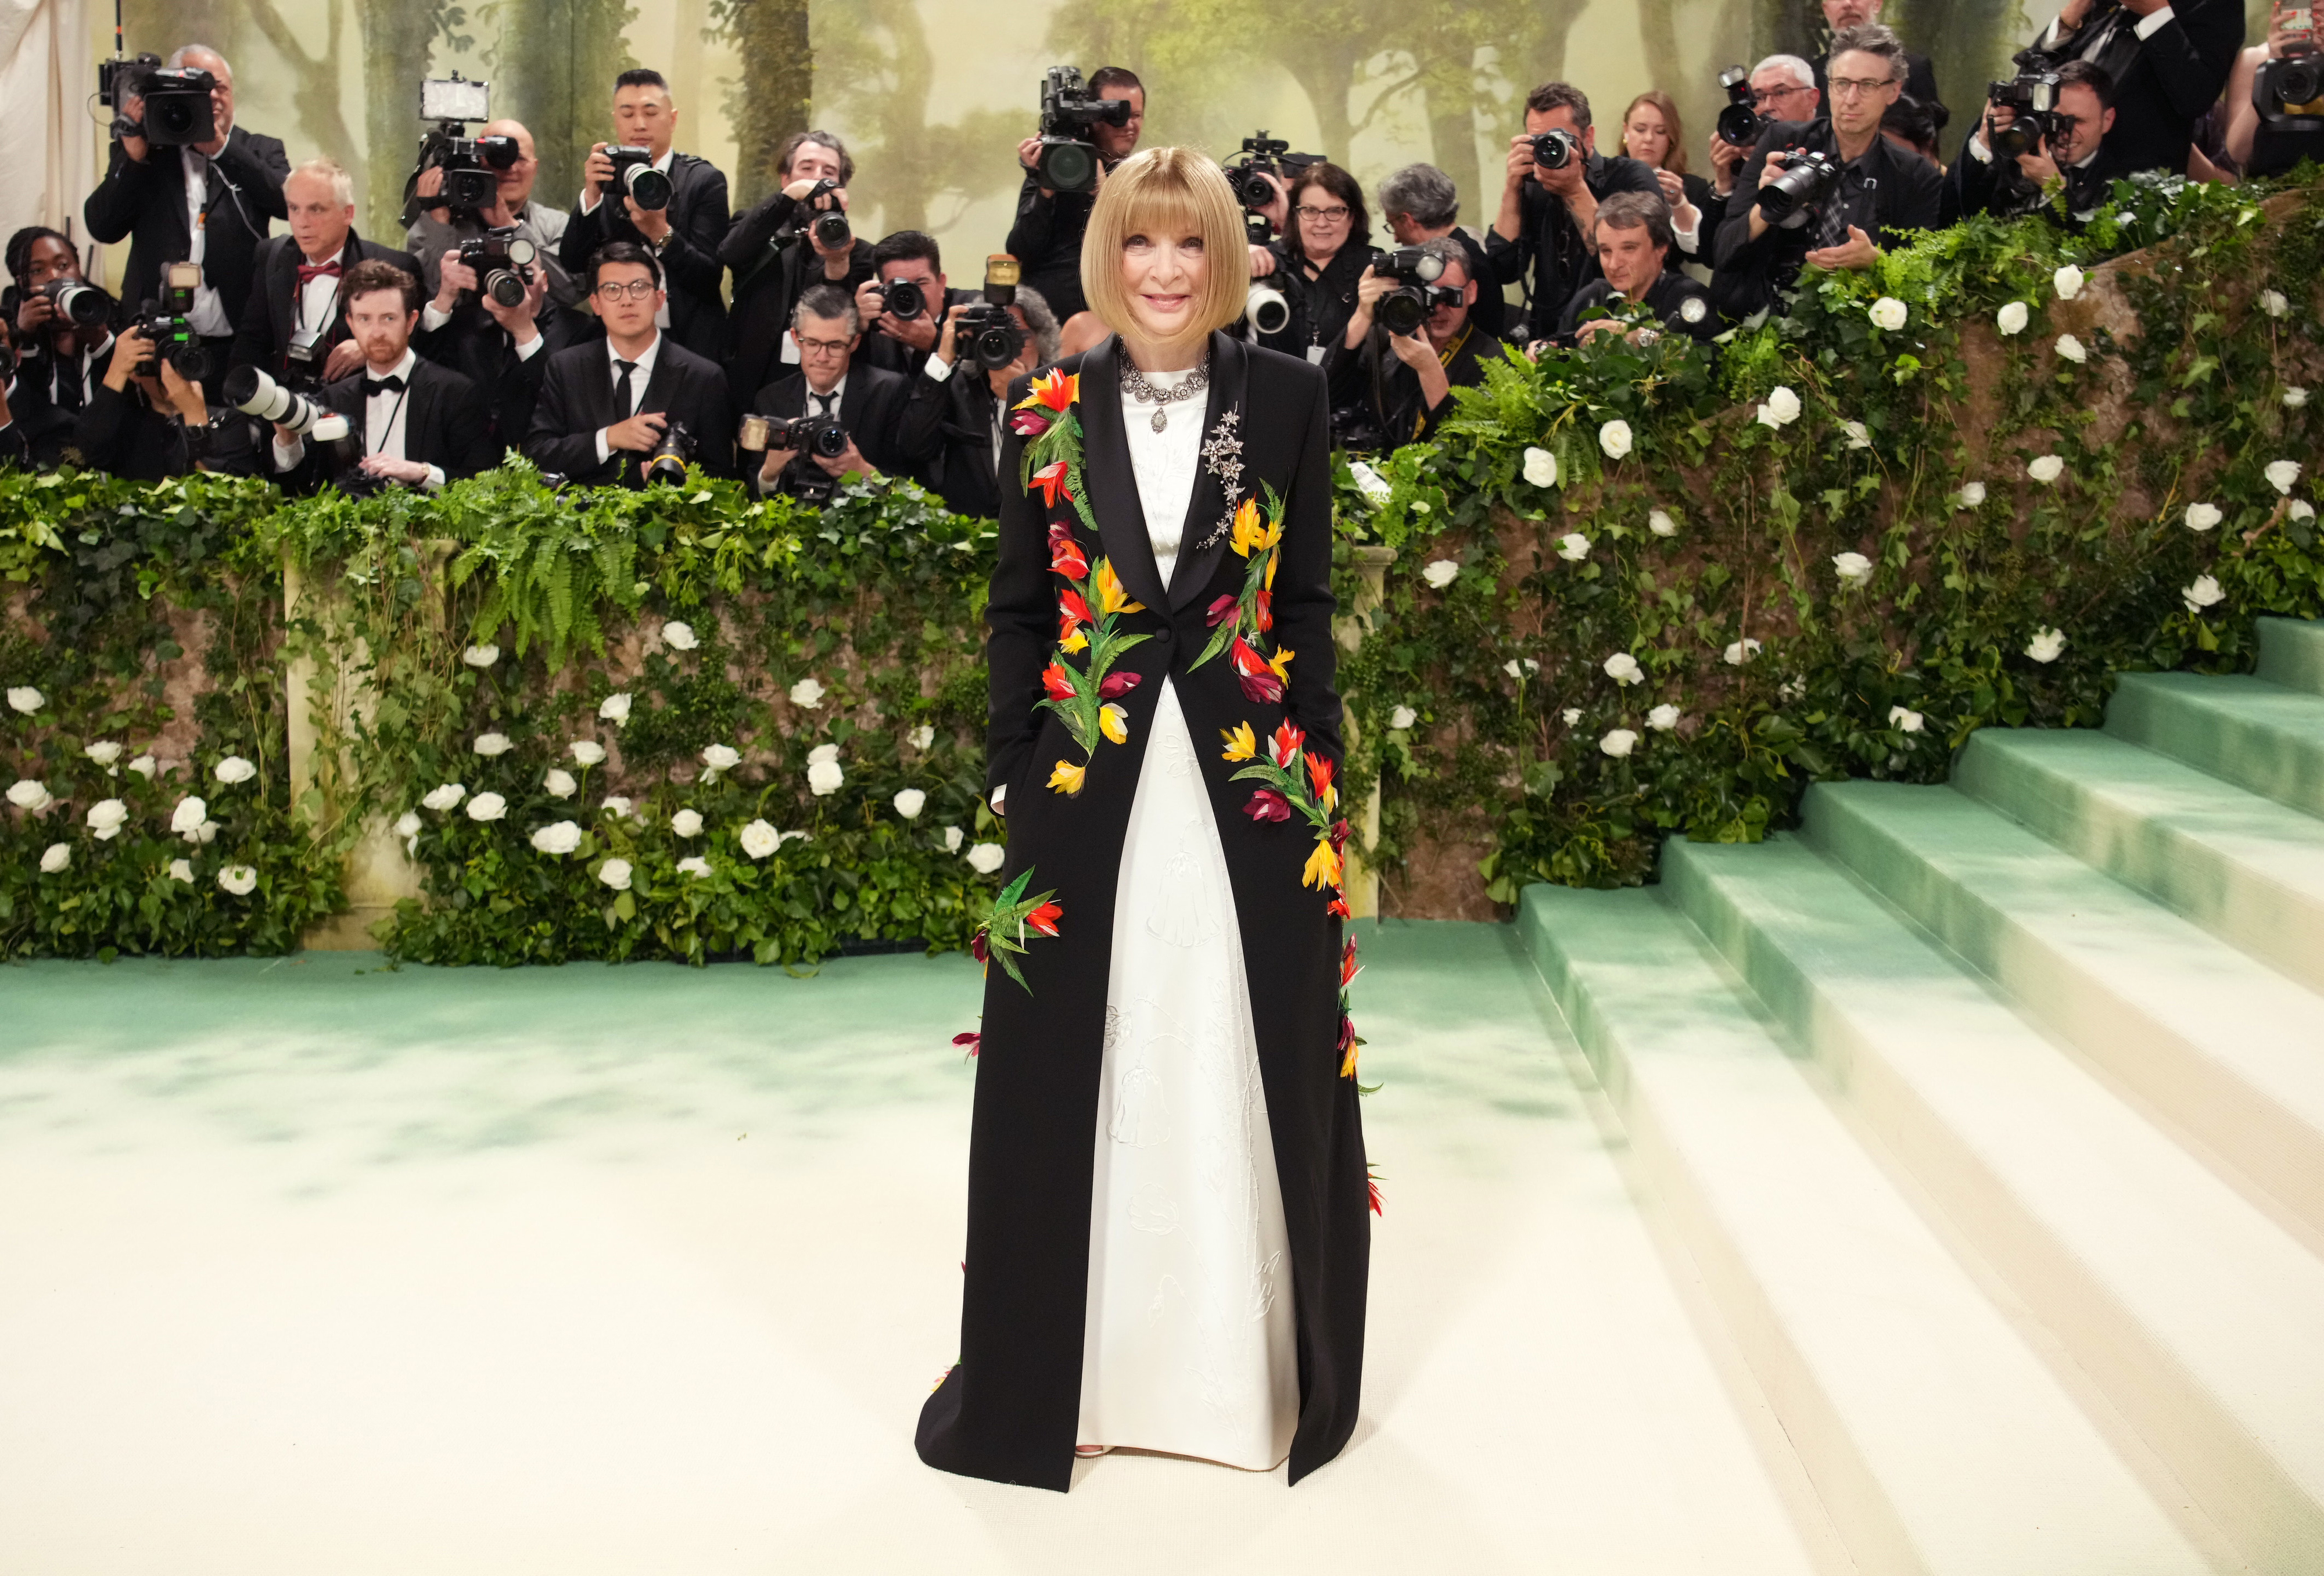 Anna Wintour at an event wearing a floral-patterned long coat